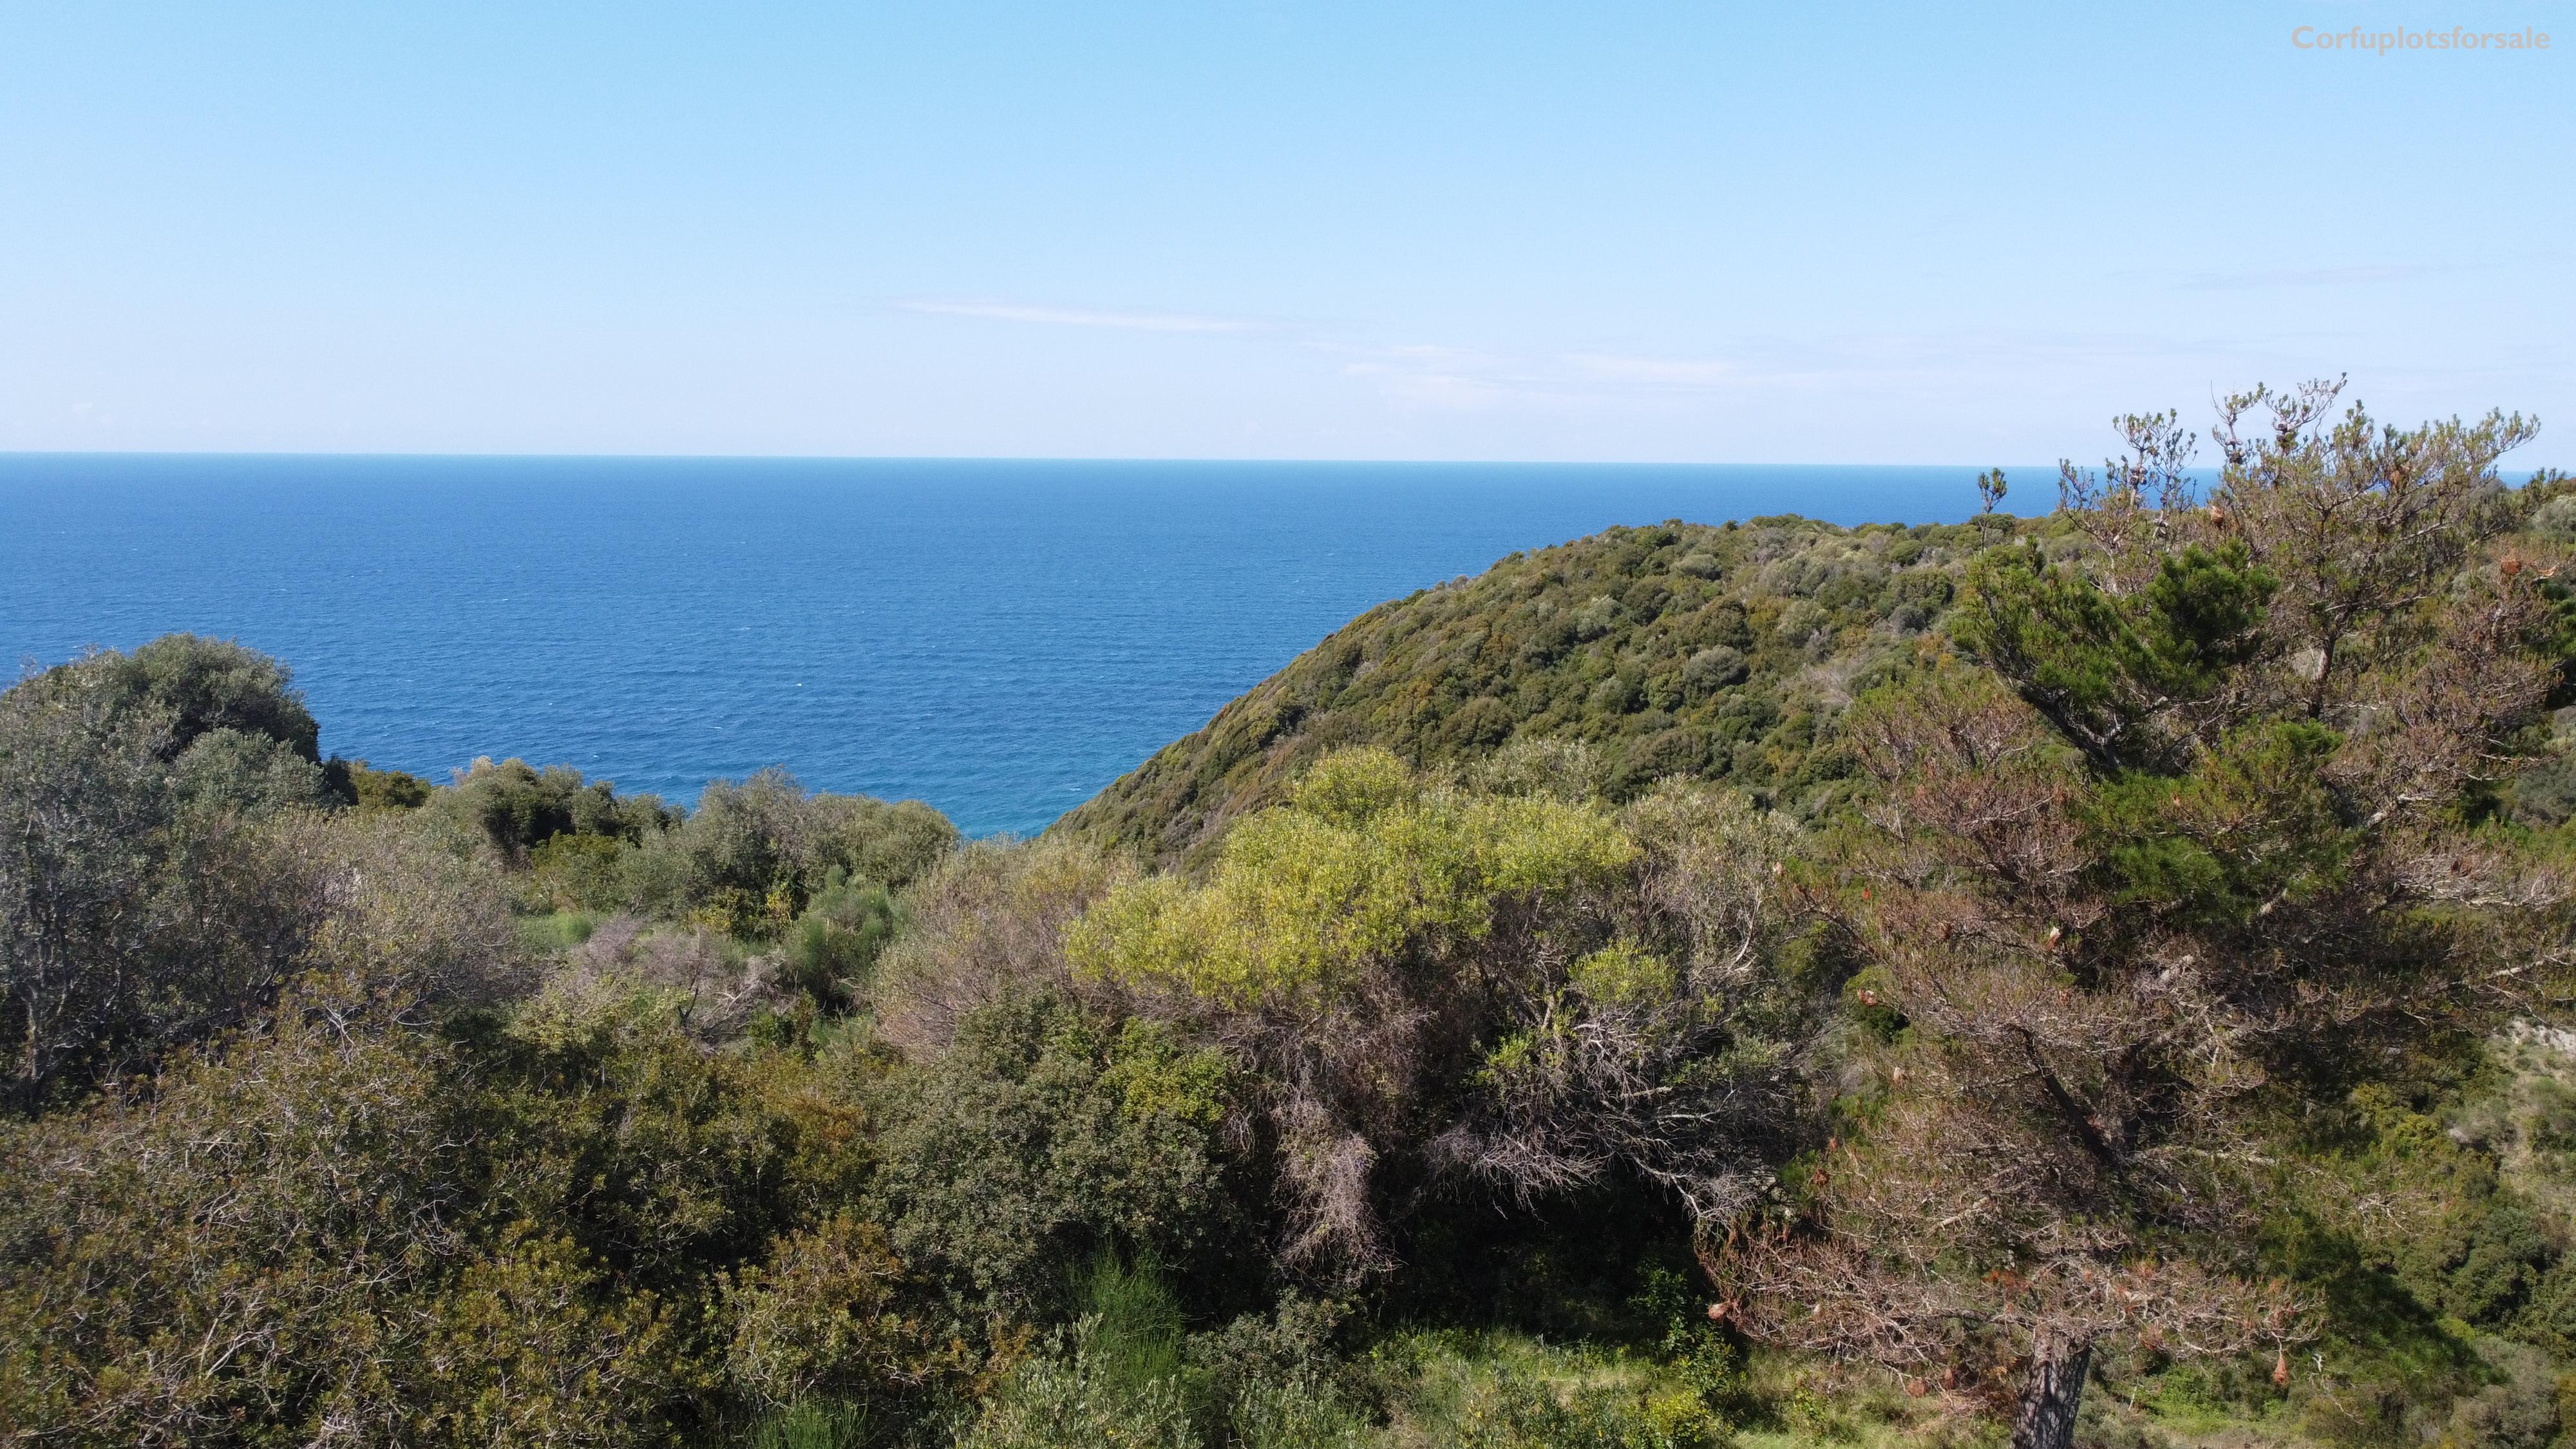 For the lovers of secluded plots with superb view near to the beach